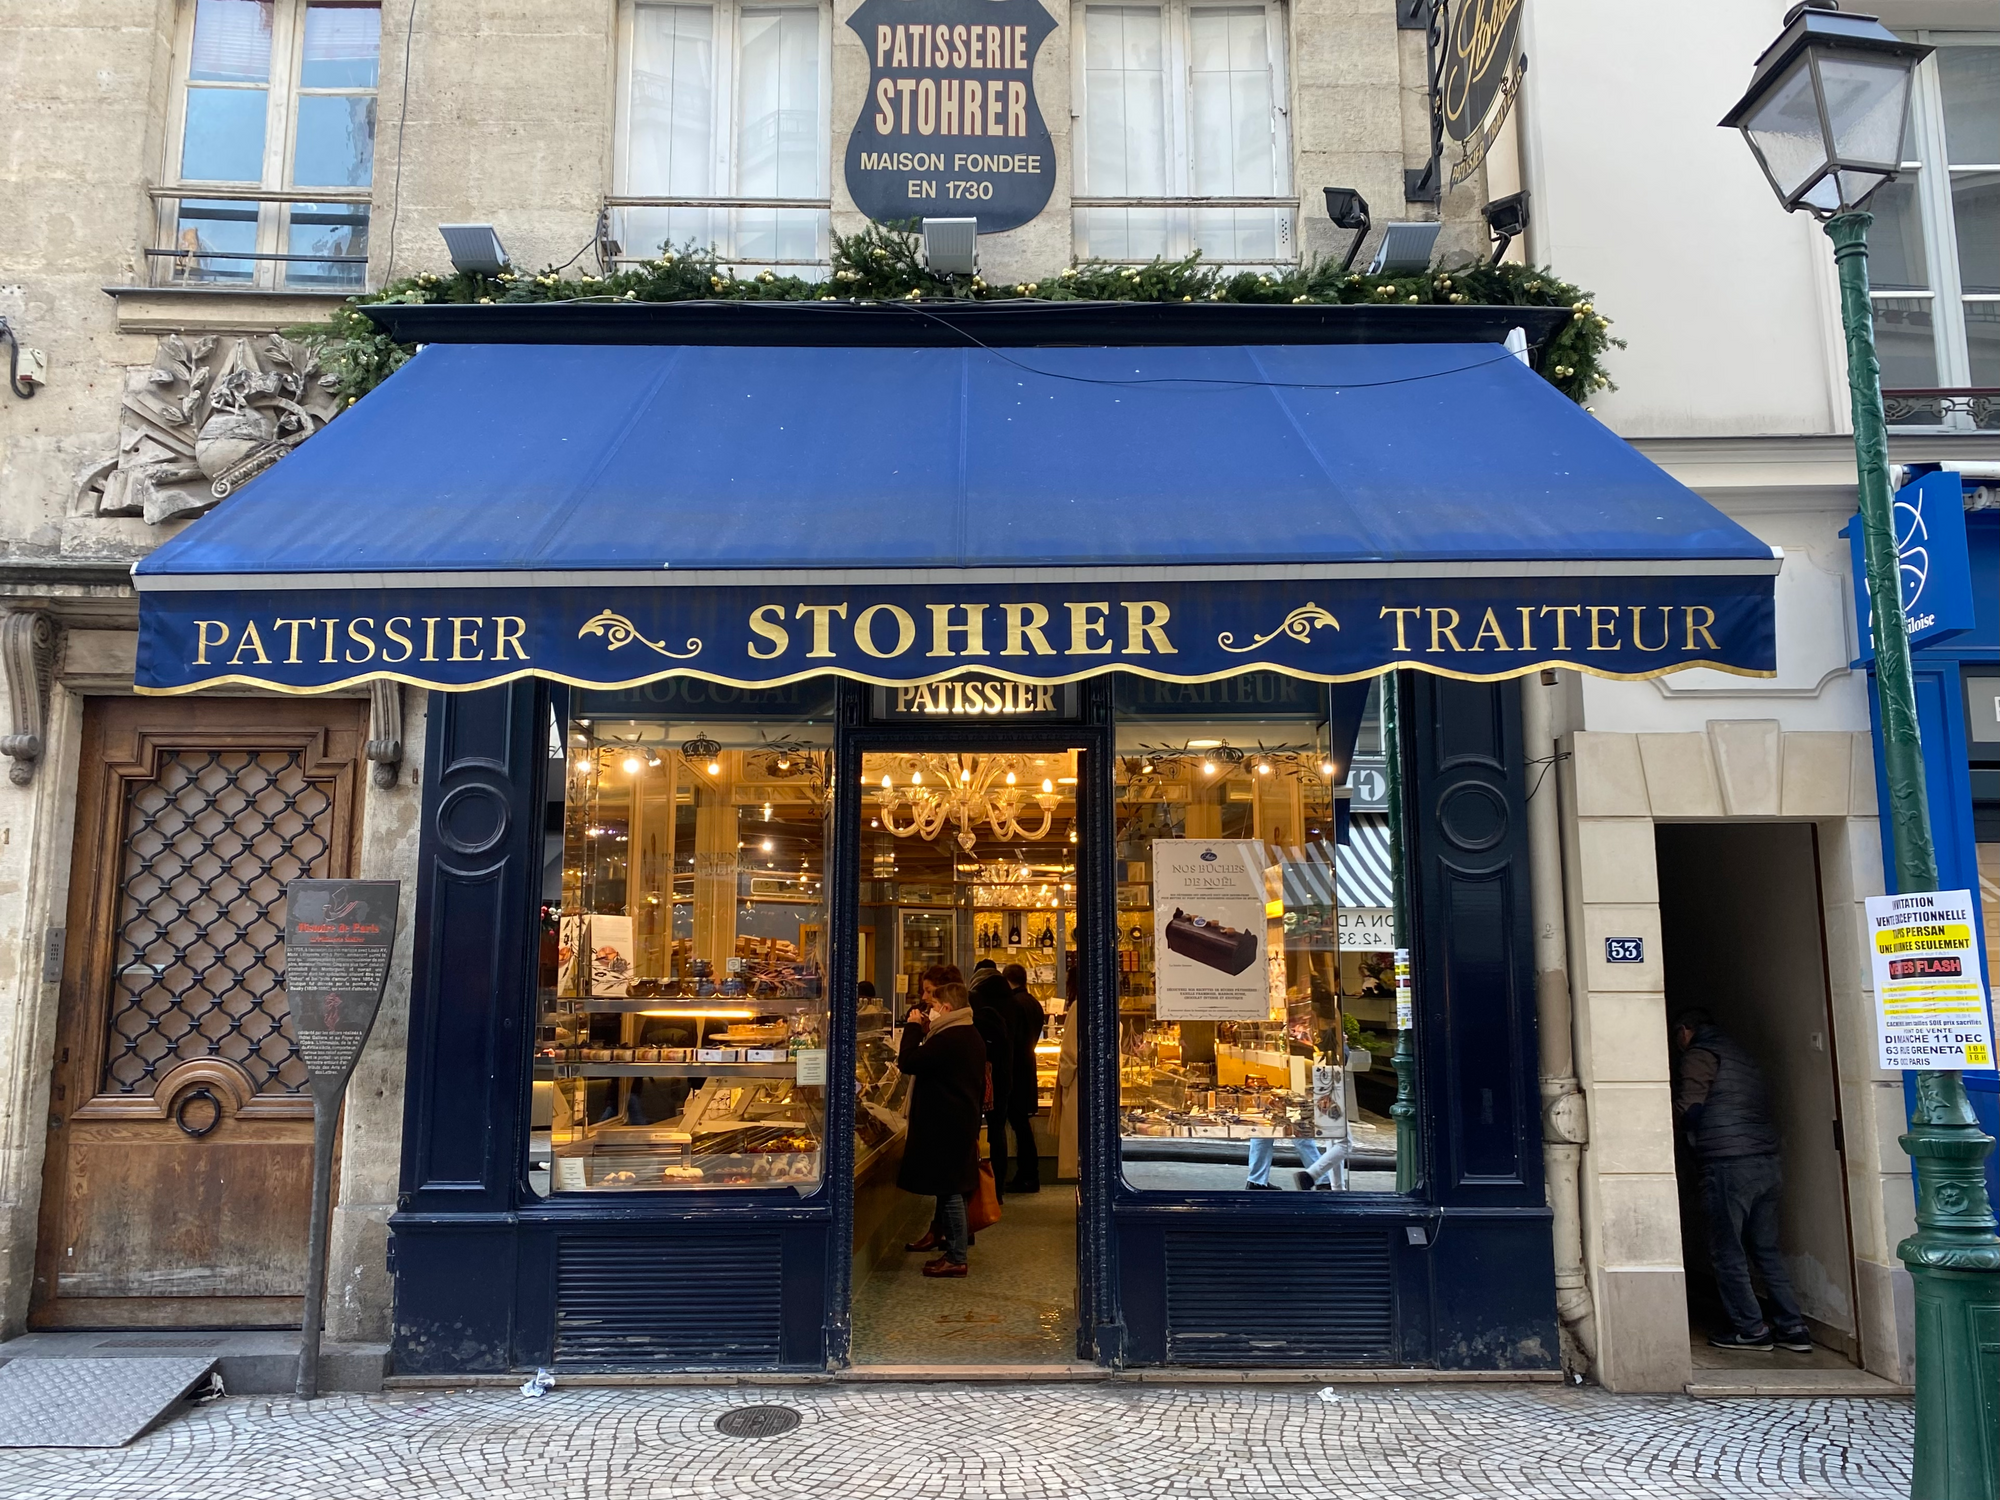 The Stohrer storefront is a dark blue awning with gold lettering that says “Stohrer” in the center. Photo Credit: Justine Hagard